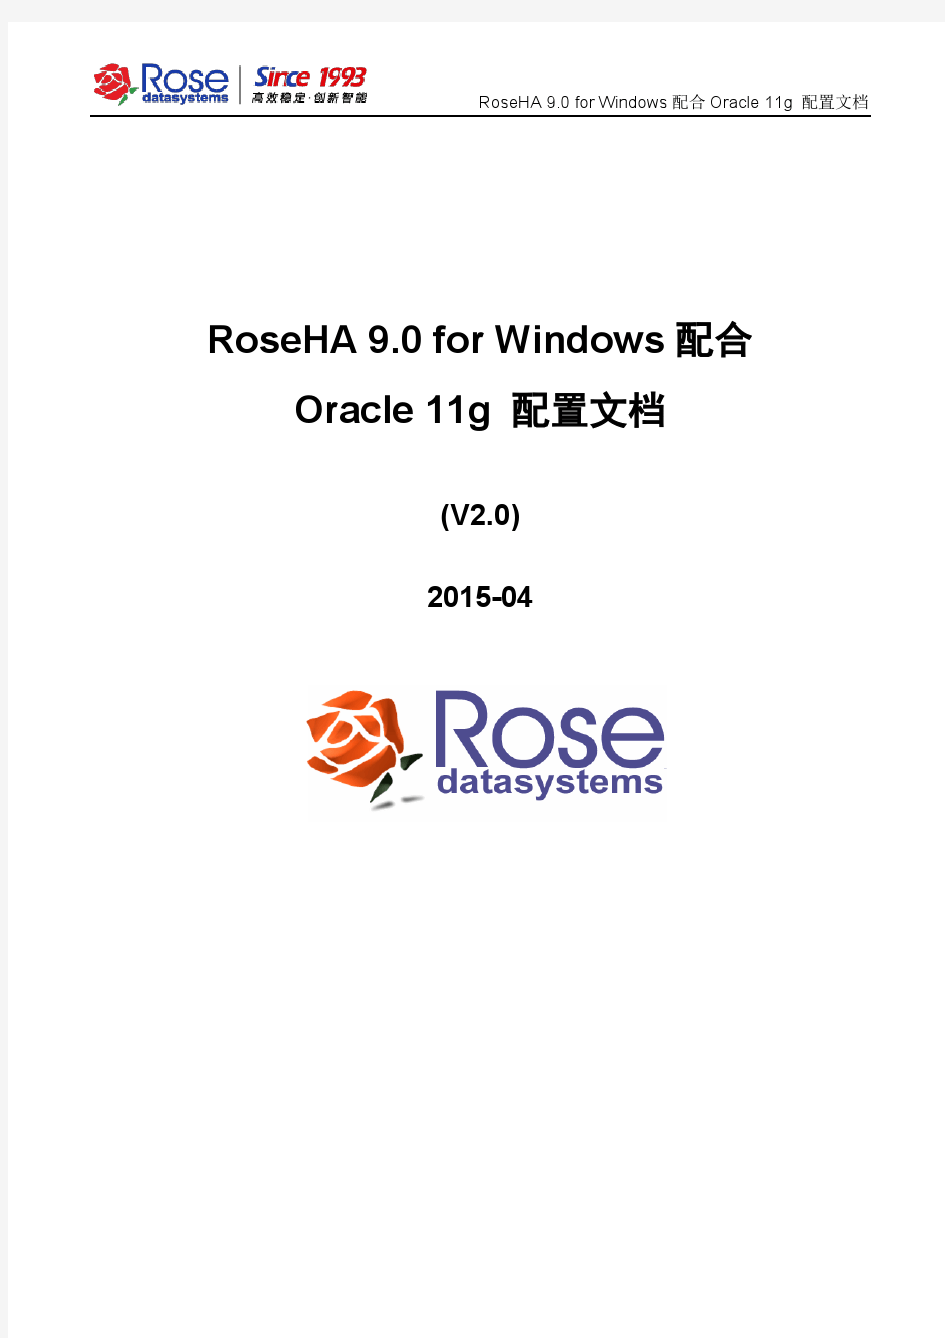 RoseHA 9.0 for Windows配合Oracle11g配置文档_v2.0-2015-04